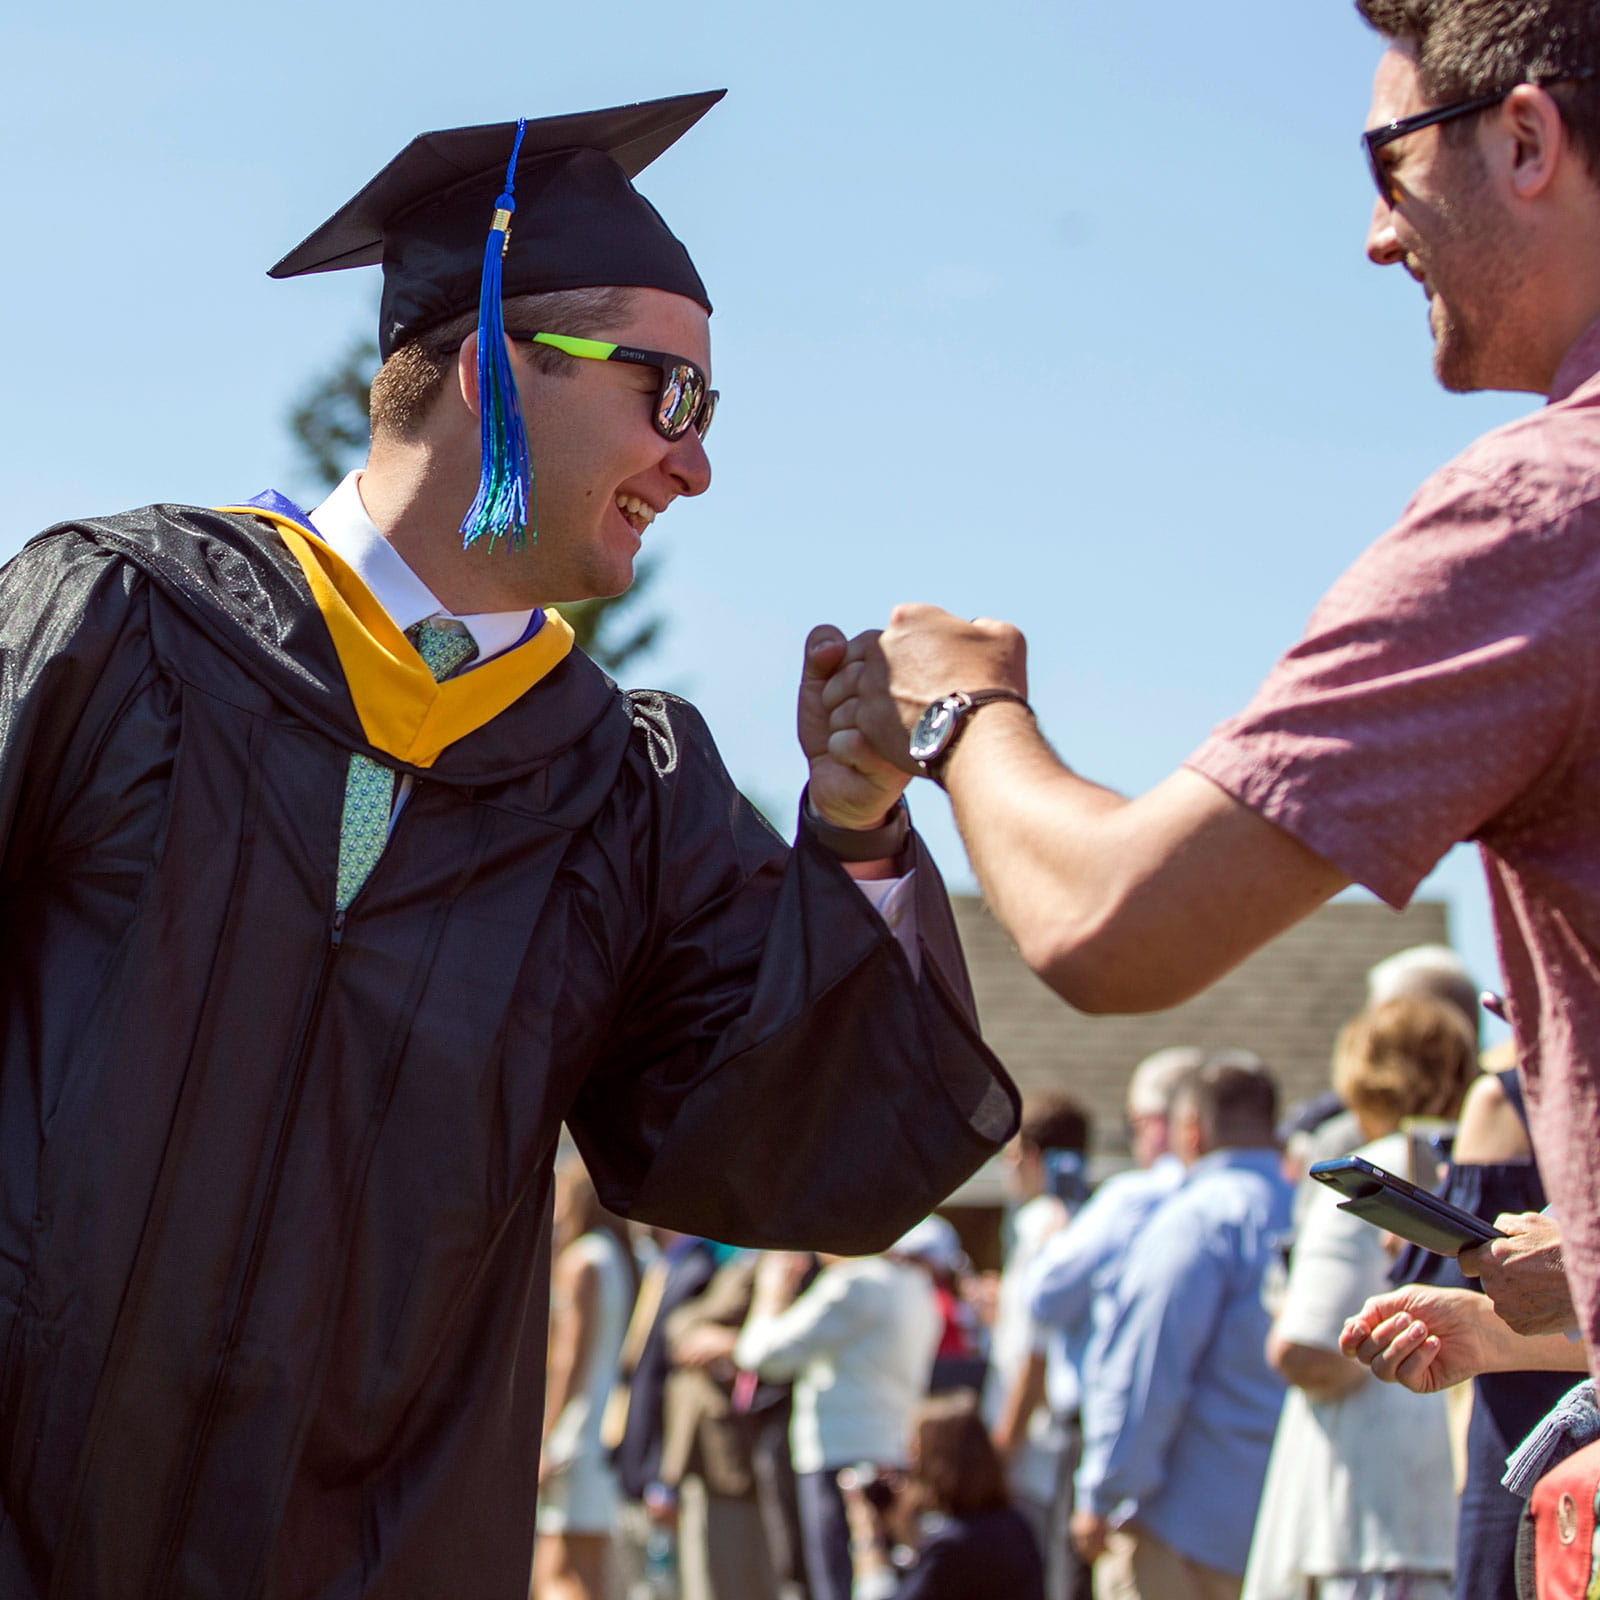 Graduate giving a fist bump to family member